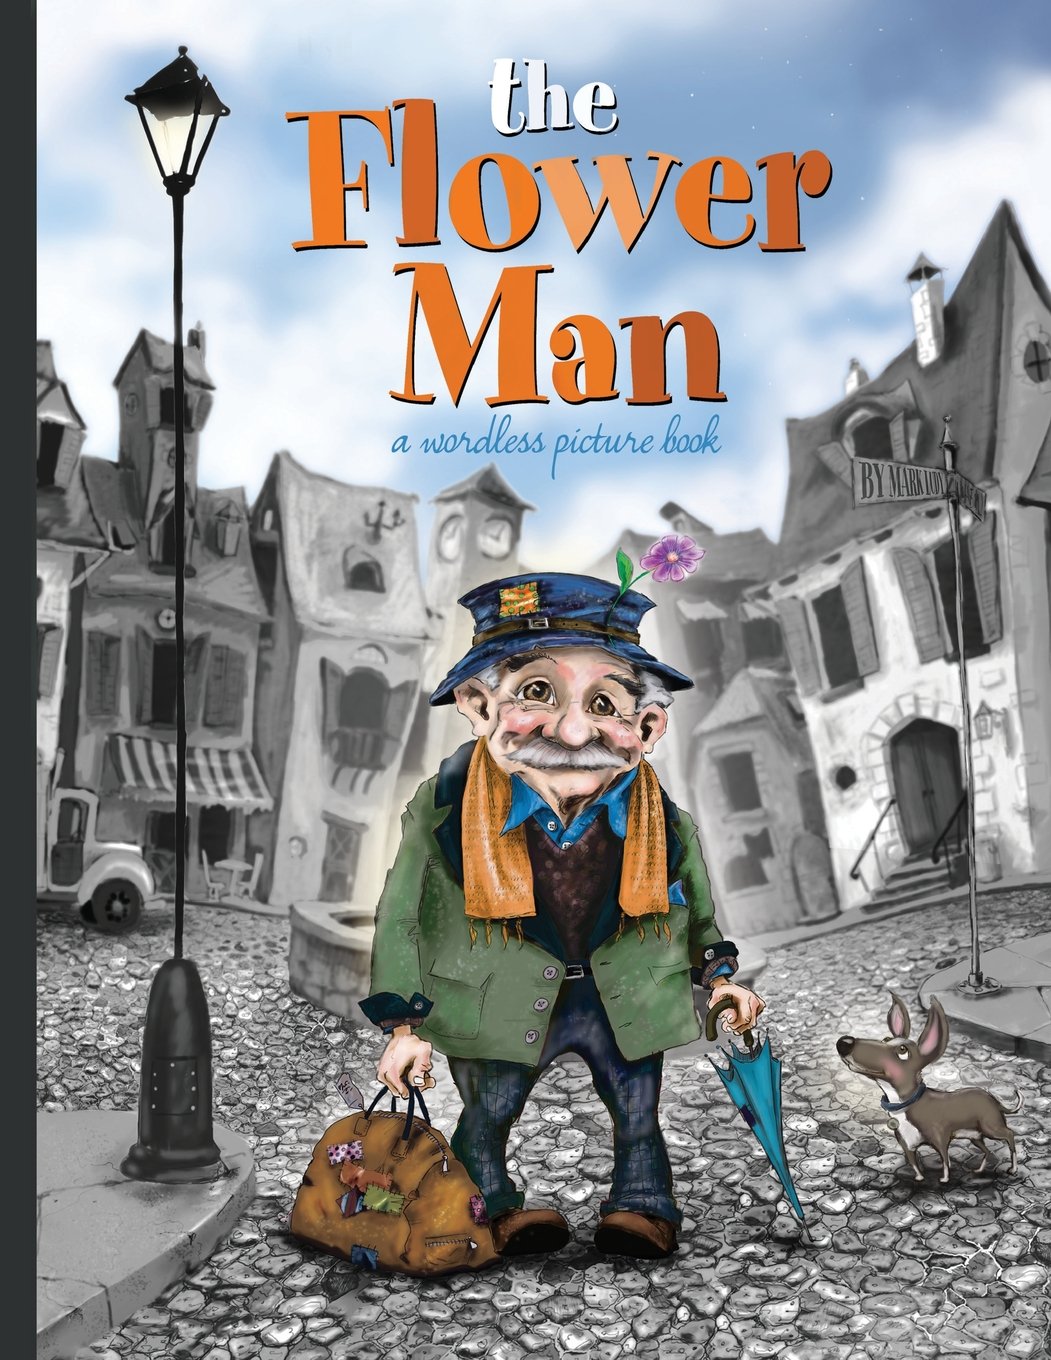 See The Flower Man in Library Catalog